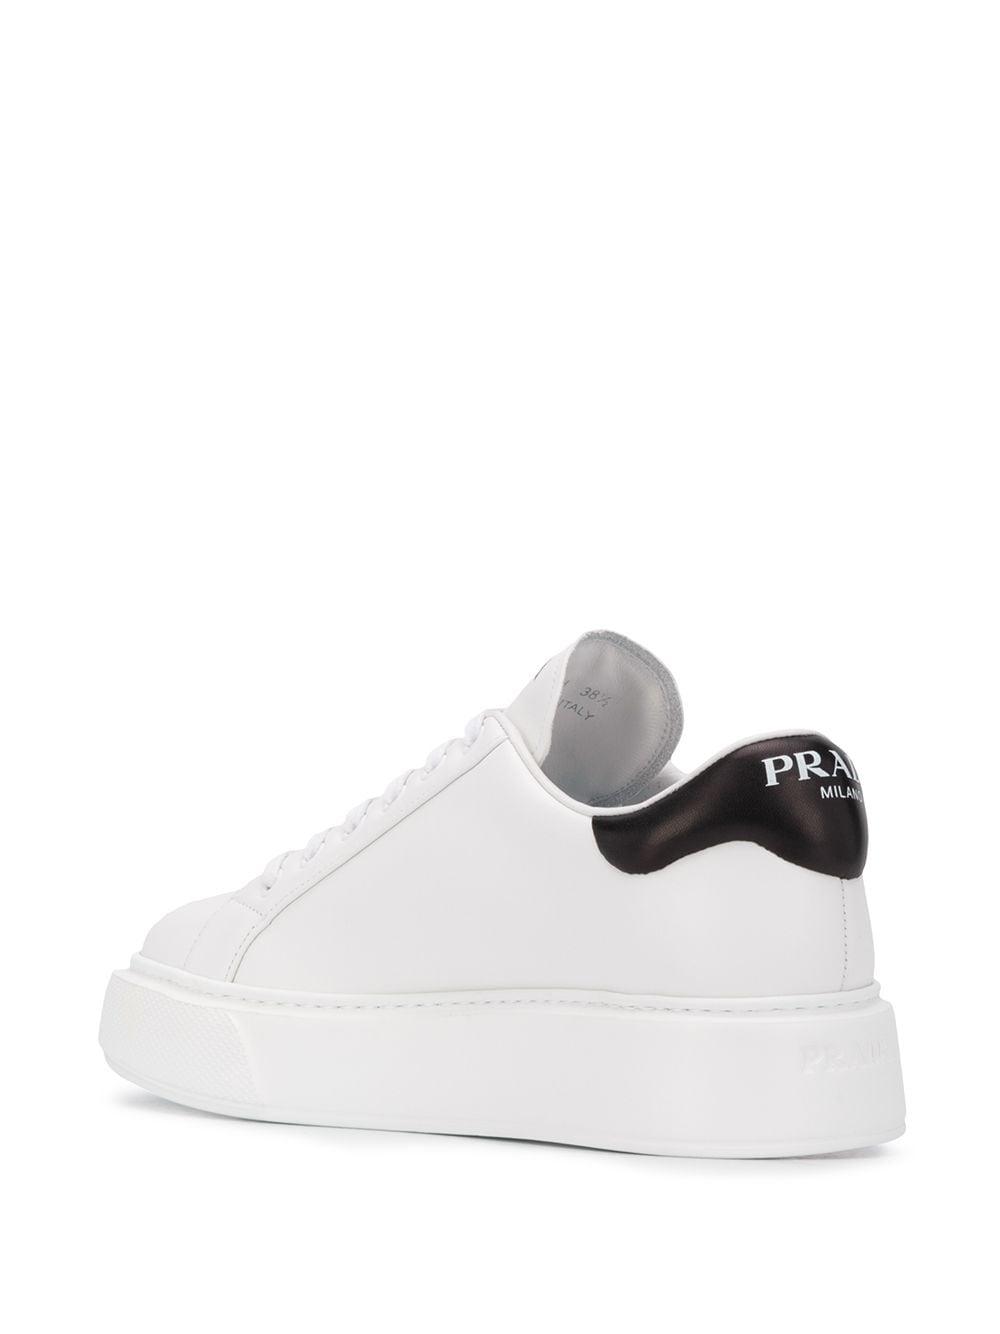 Prada Leather Chunky Sole Low-top Sneakers in White/Black (White) | Lyst